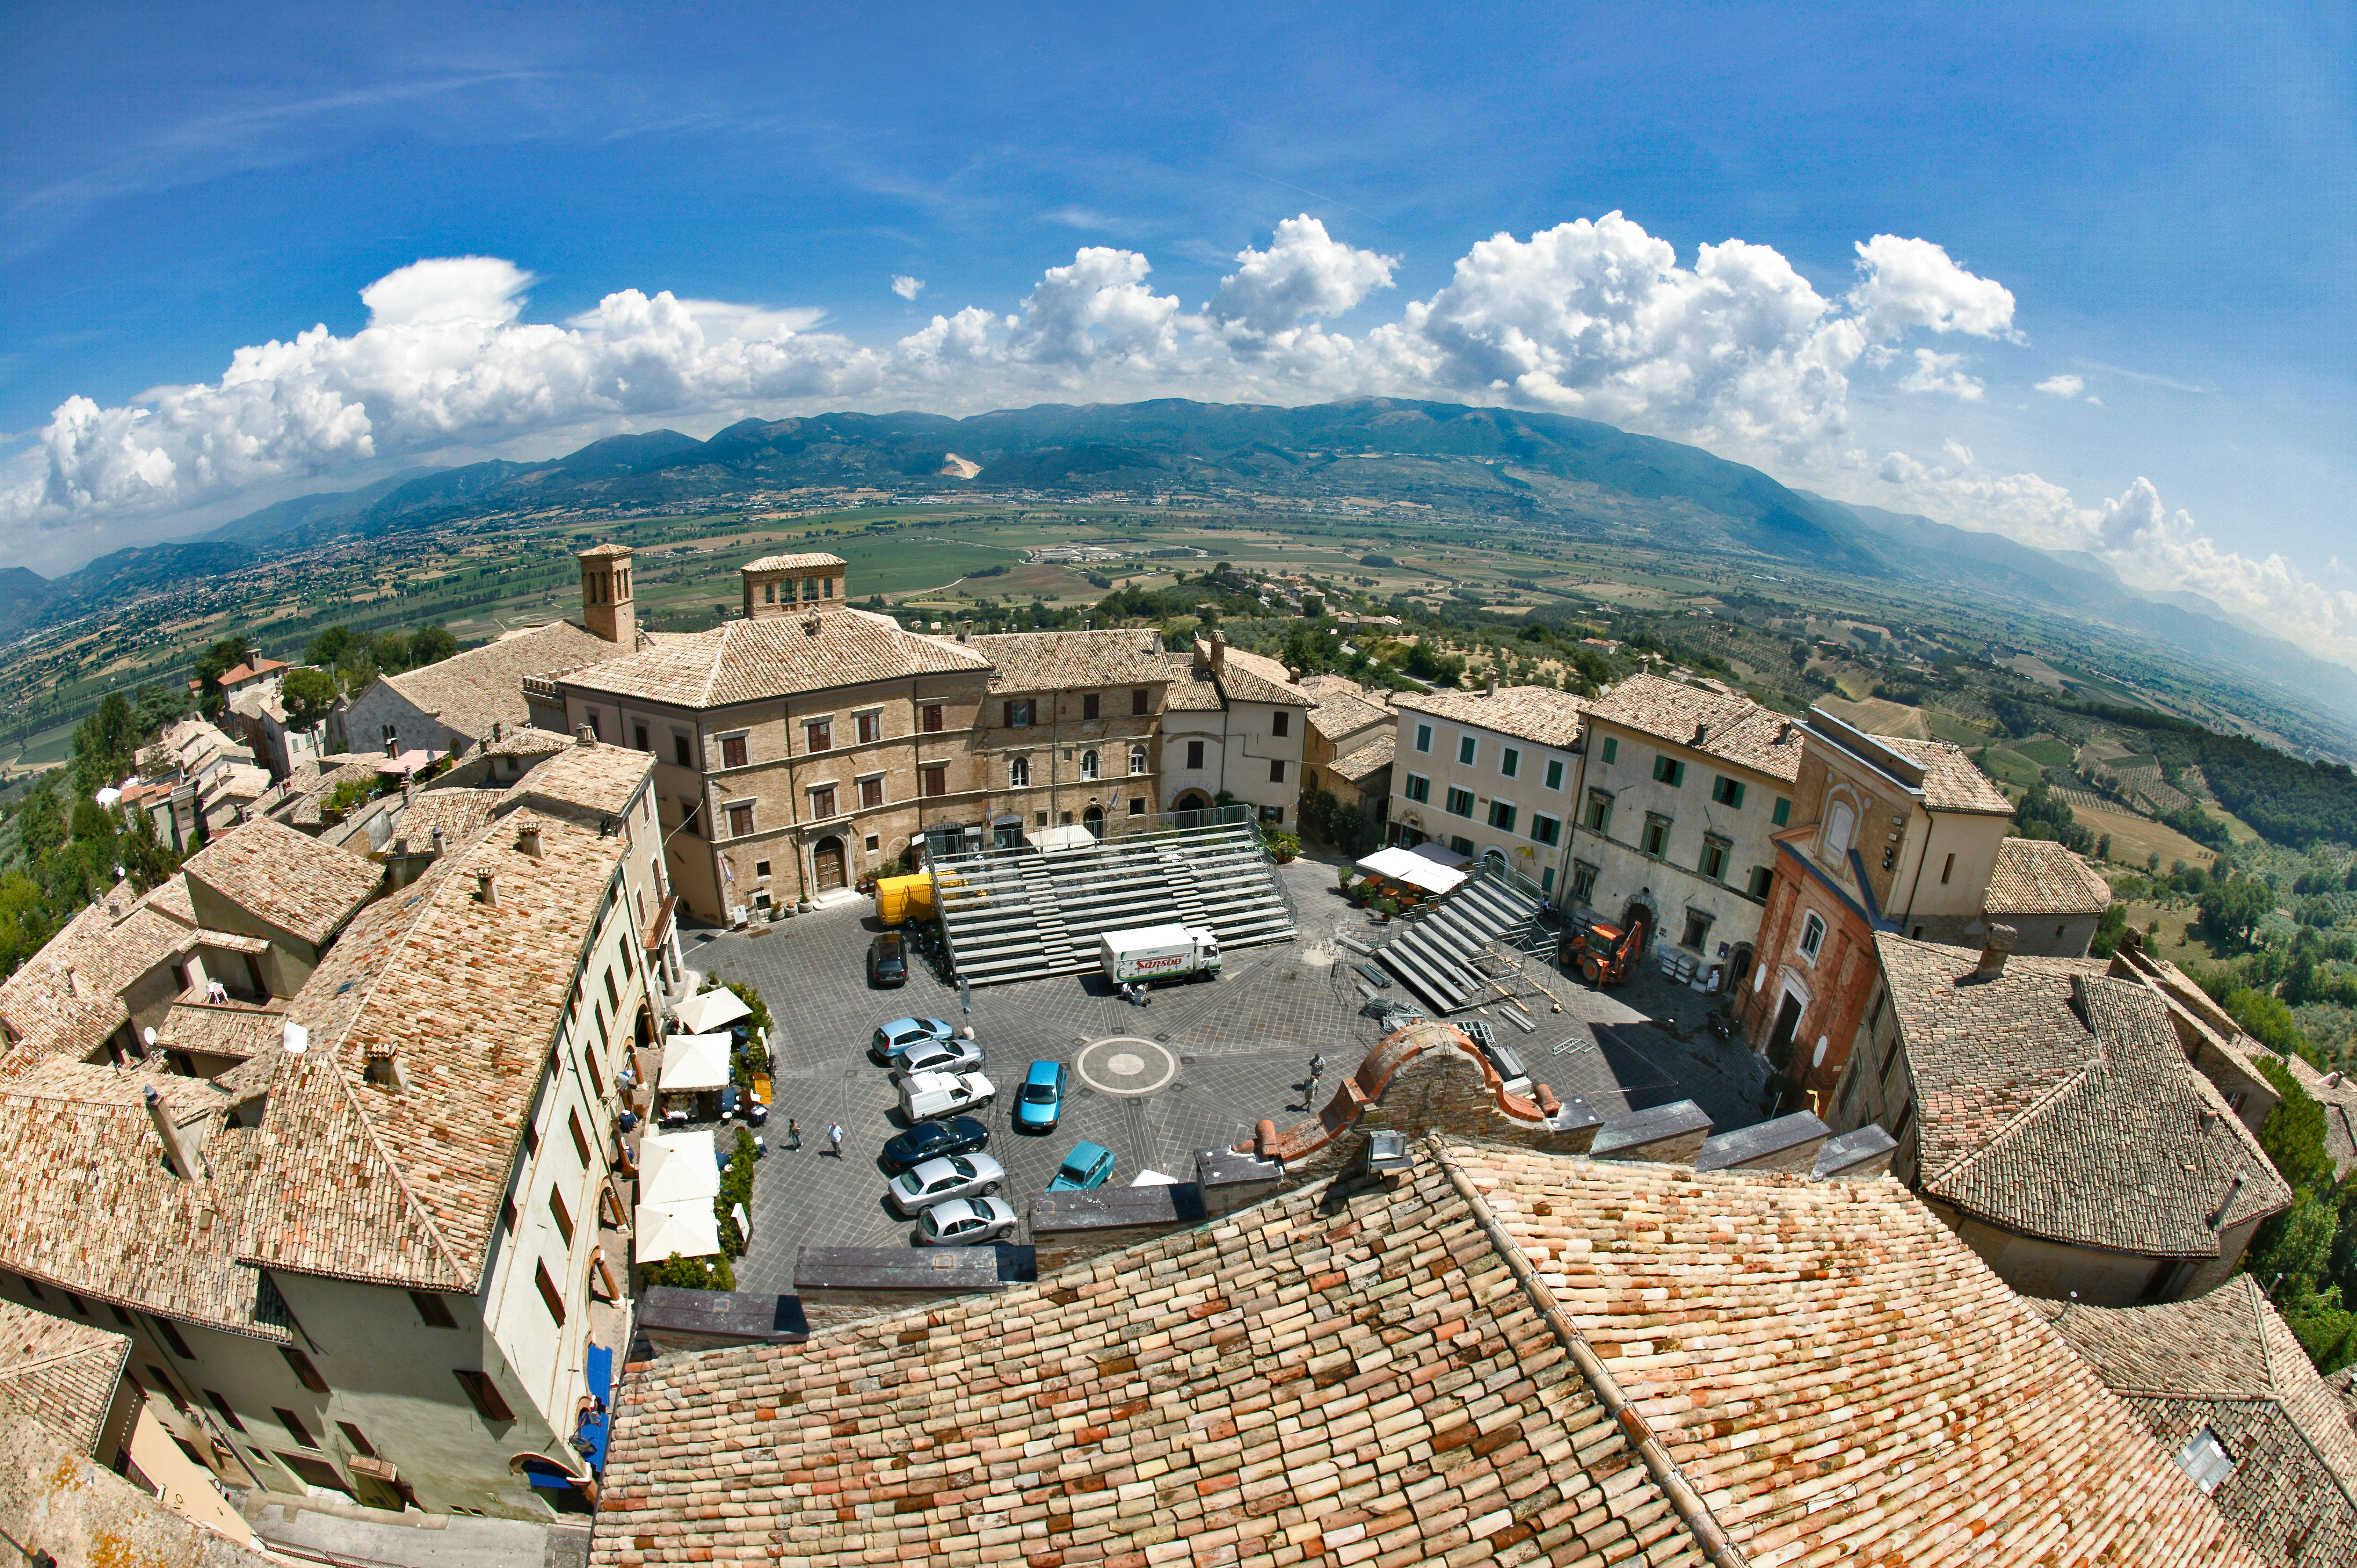 Montefalco: the round square of the little town. In the background, the Umbria Valley.